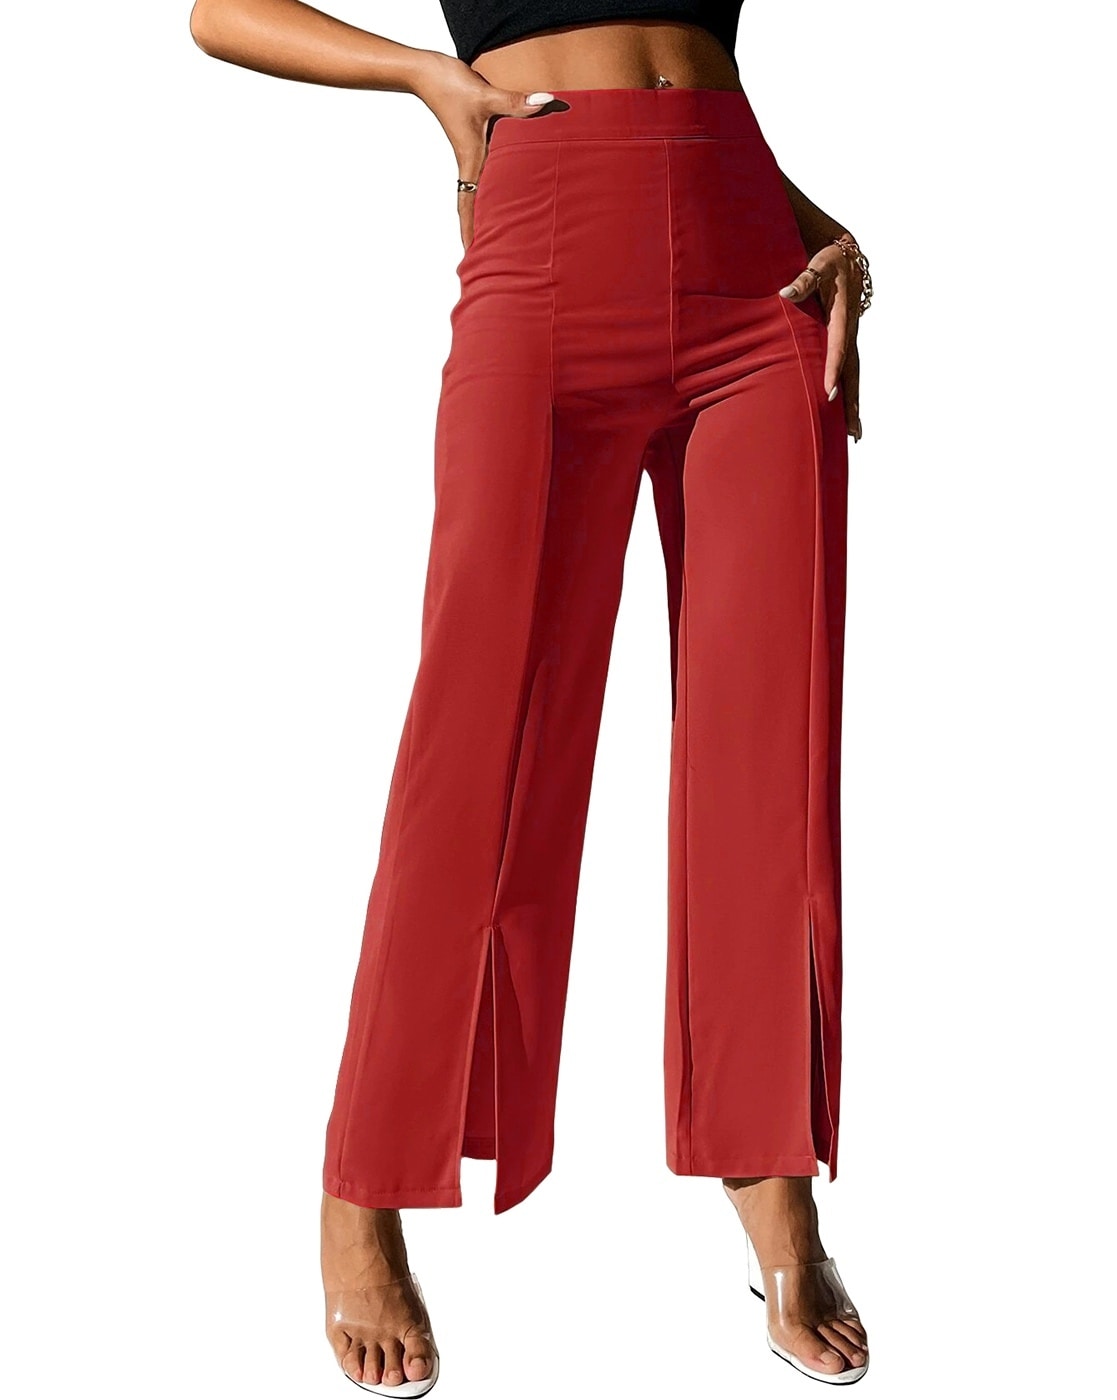 Red wool blend Pant Suit | Sumissura